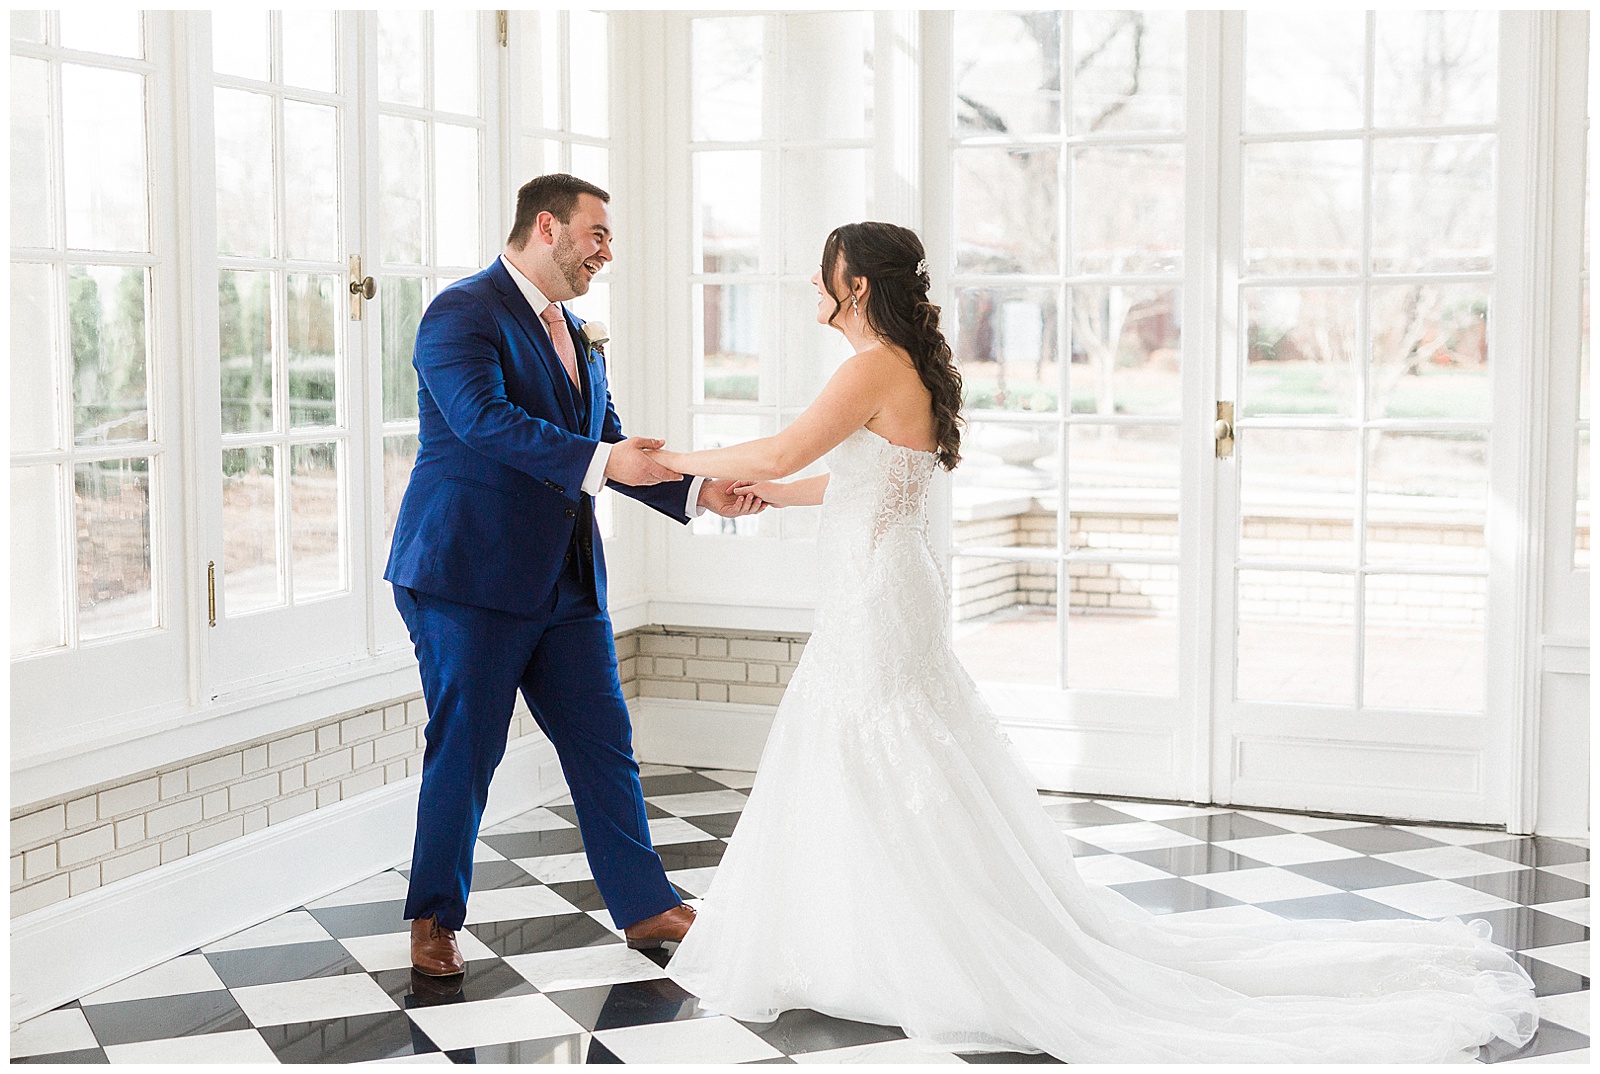 Groom's Adorable First Look of Bride's Lace Wedding Dress from Light and Airy Outdoor Wedding at Separk Mansion in Gastonia, NC | Kevyn Dixon Photography